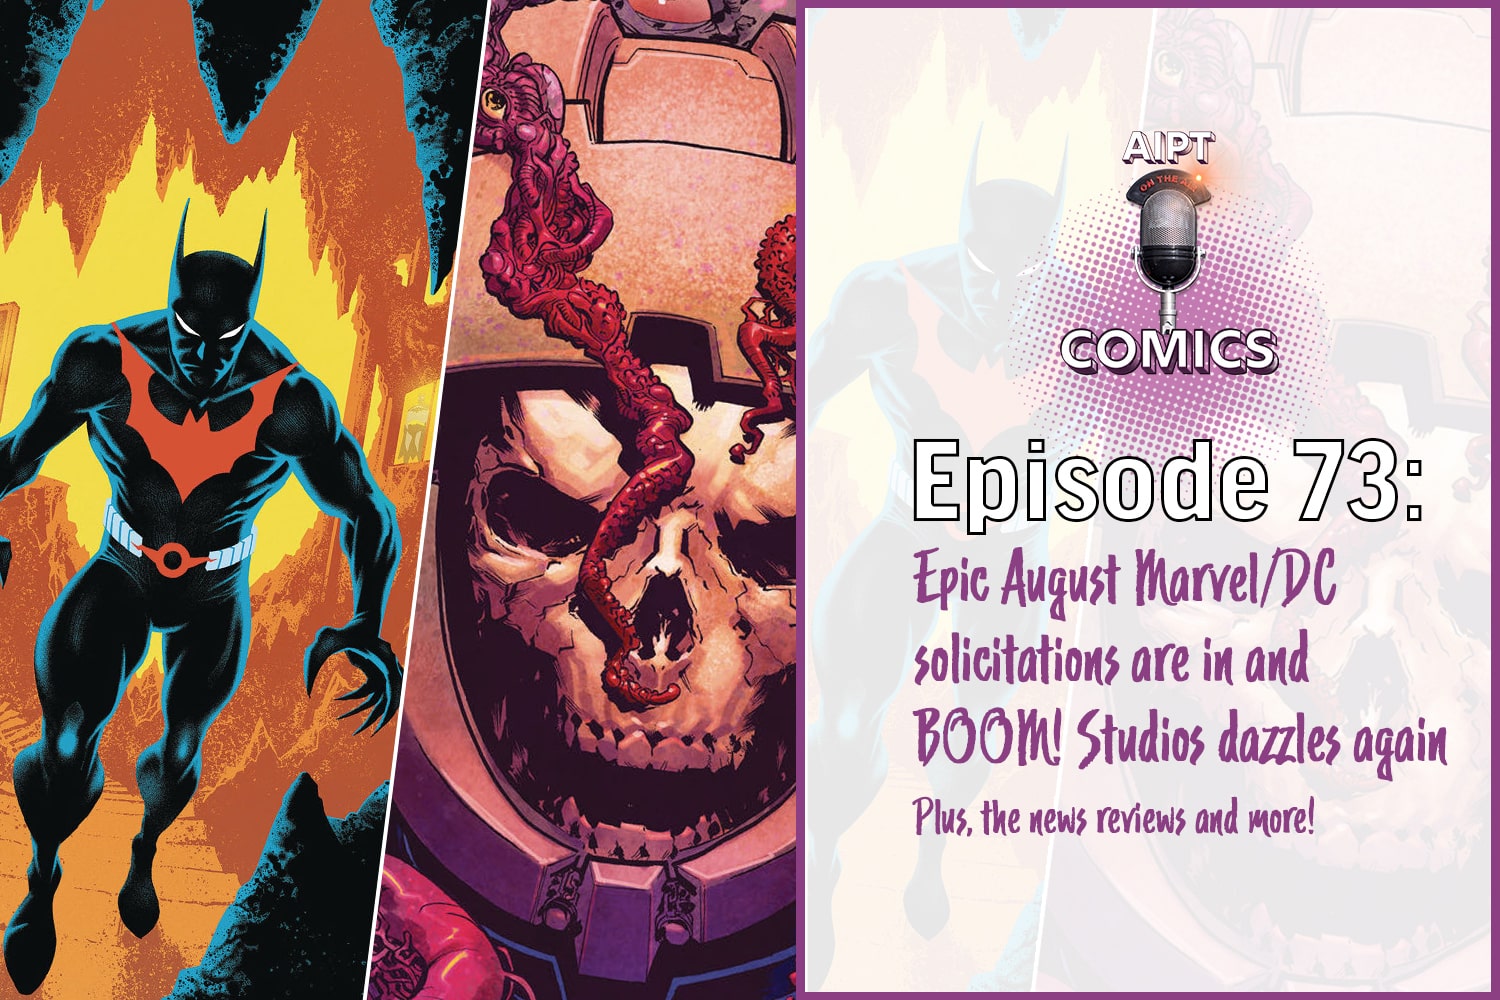 AIPT Comics Podcast Episode 73: Epic August Marvel/DC solicitations are in and BOOM! Studios dazzles again